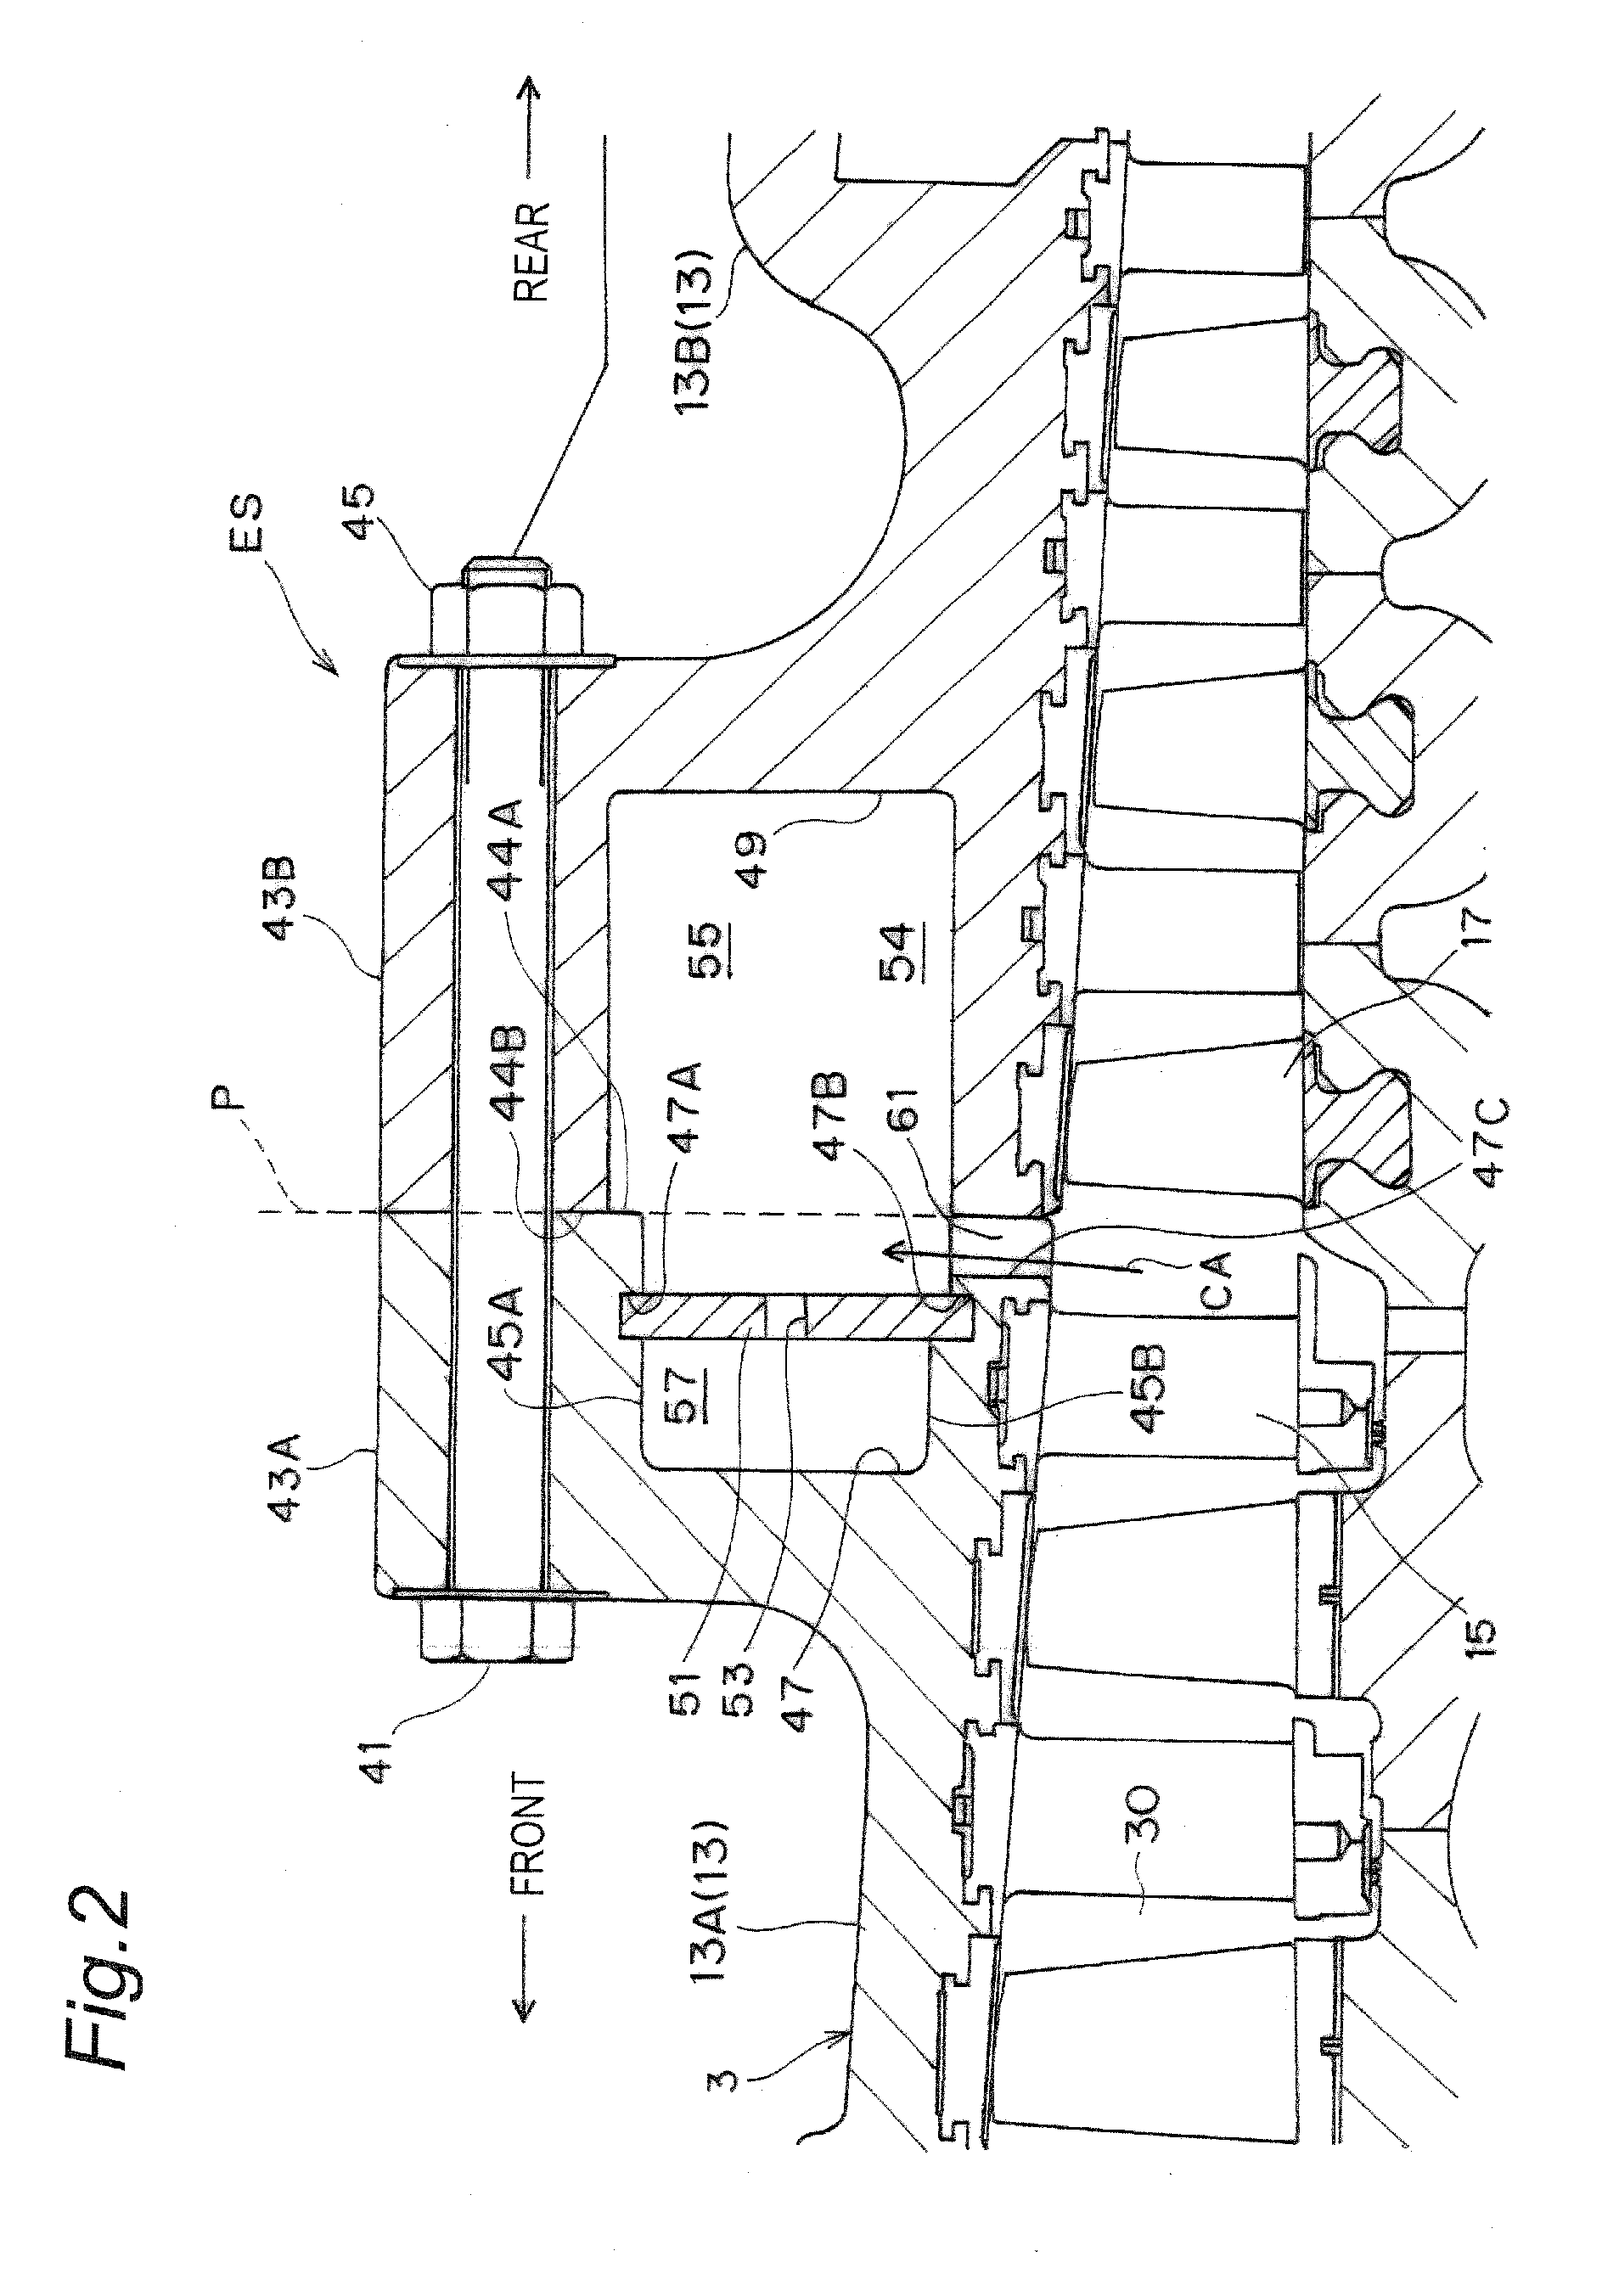 Structure for extracting compressed air from compressor of gas turbine engine and gas turbine engine with the structure